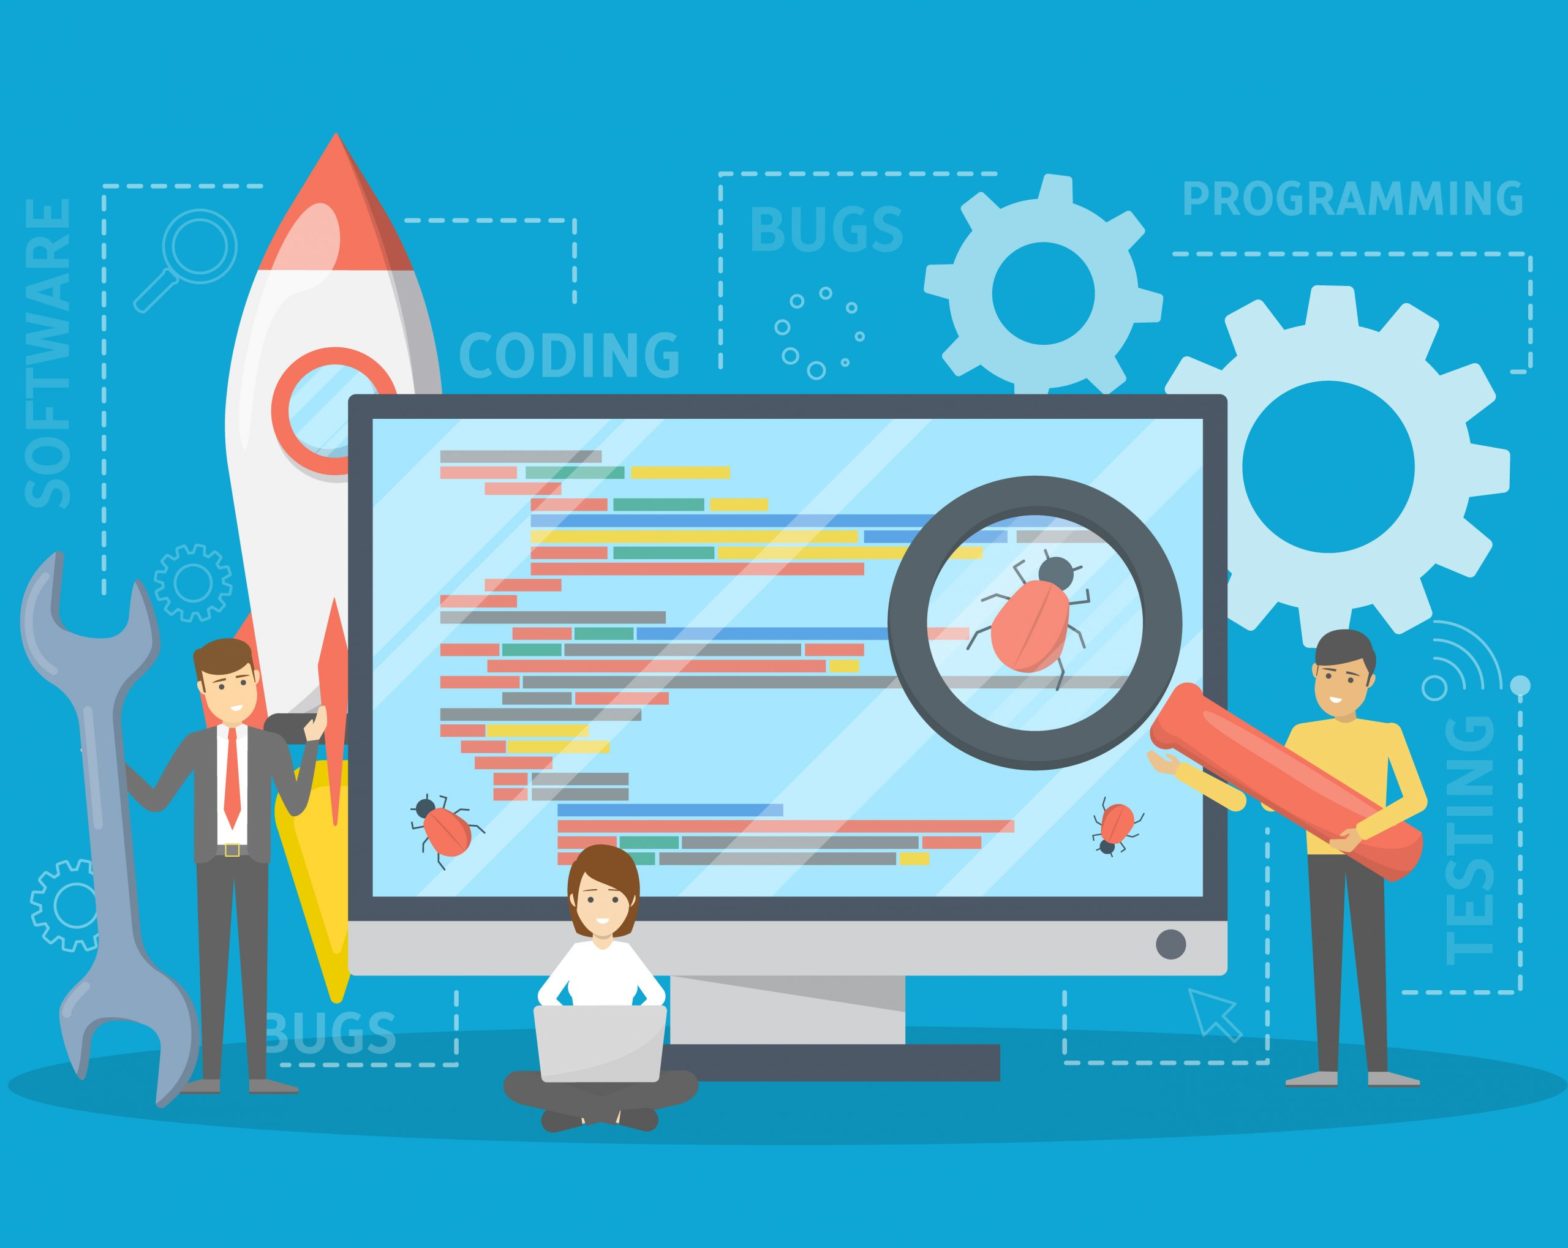 Faster Application Release Cycles Drive the Need for Increased Test Automation